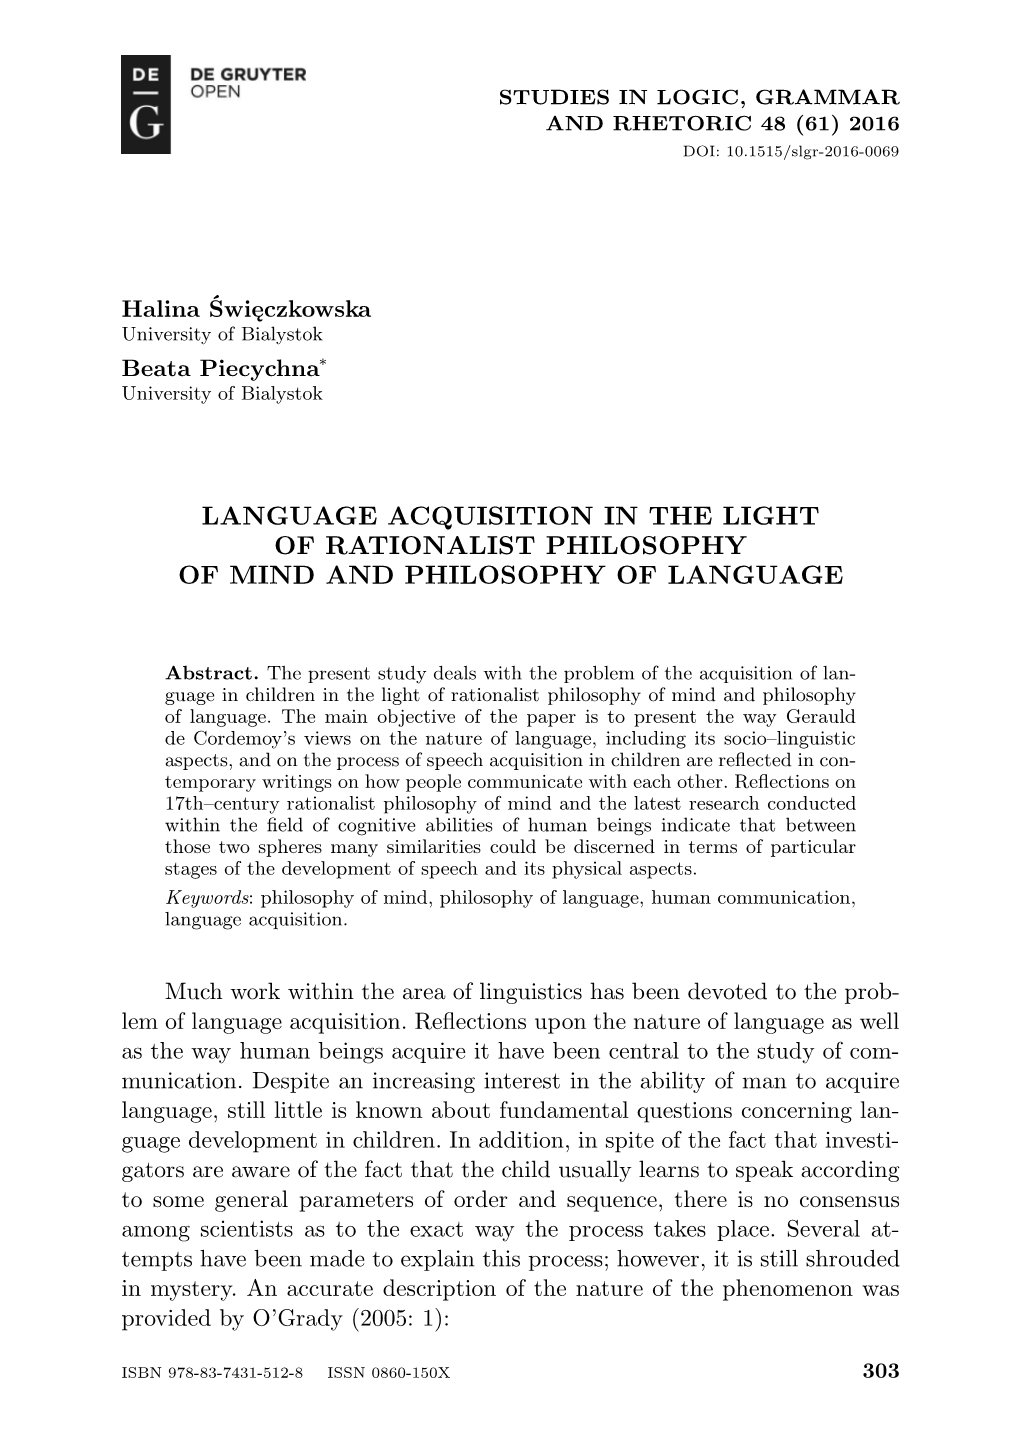 Language Acquisition in the Light of Rationalist Philosophy of Mind and Philosophy of Language